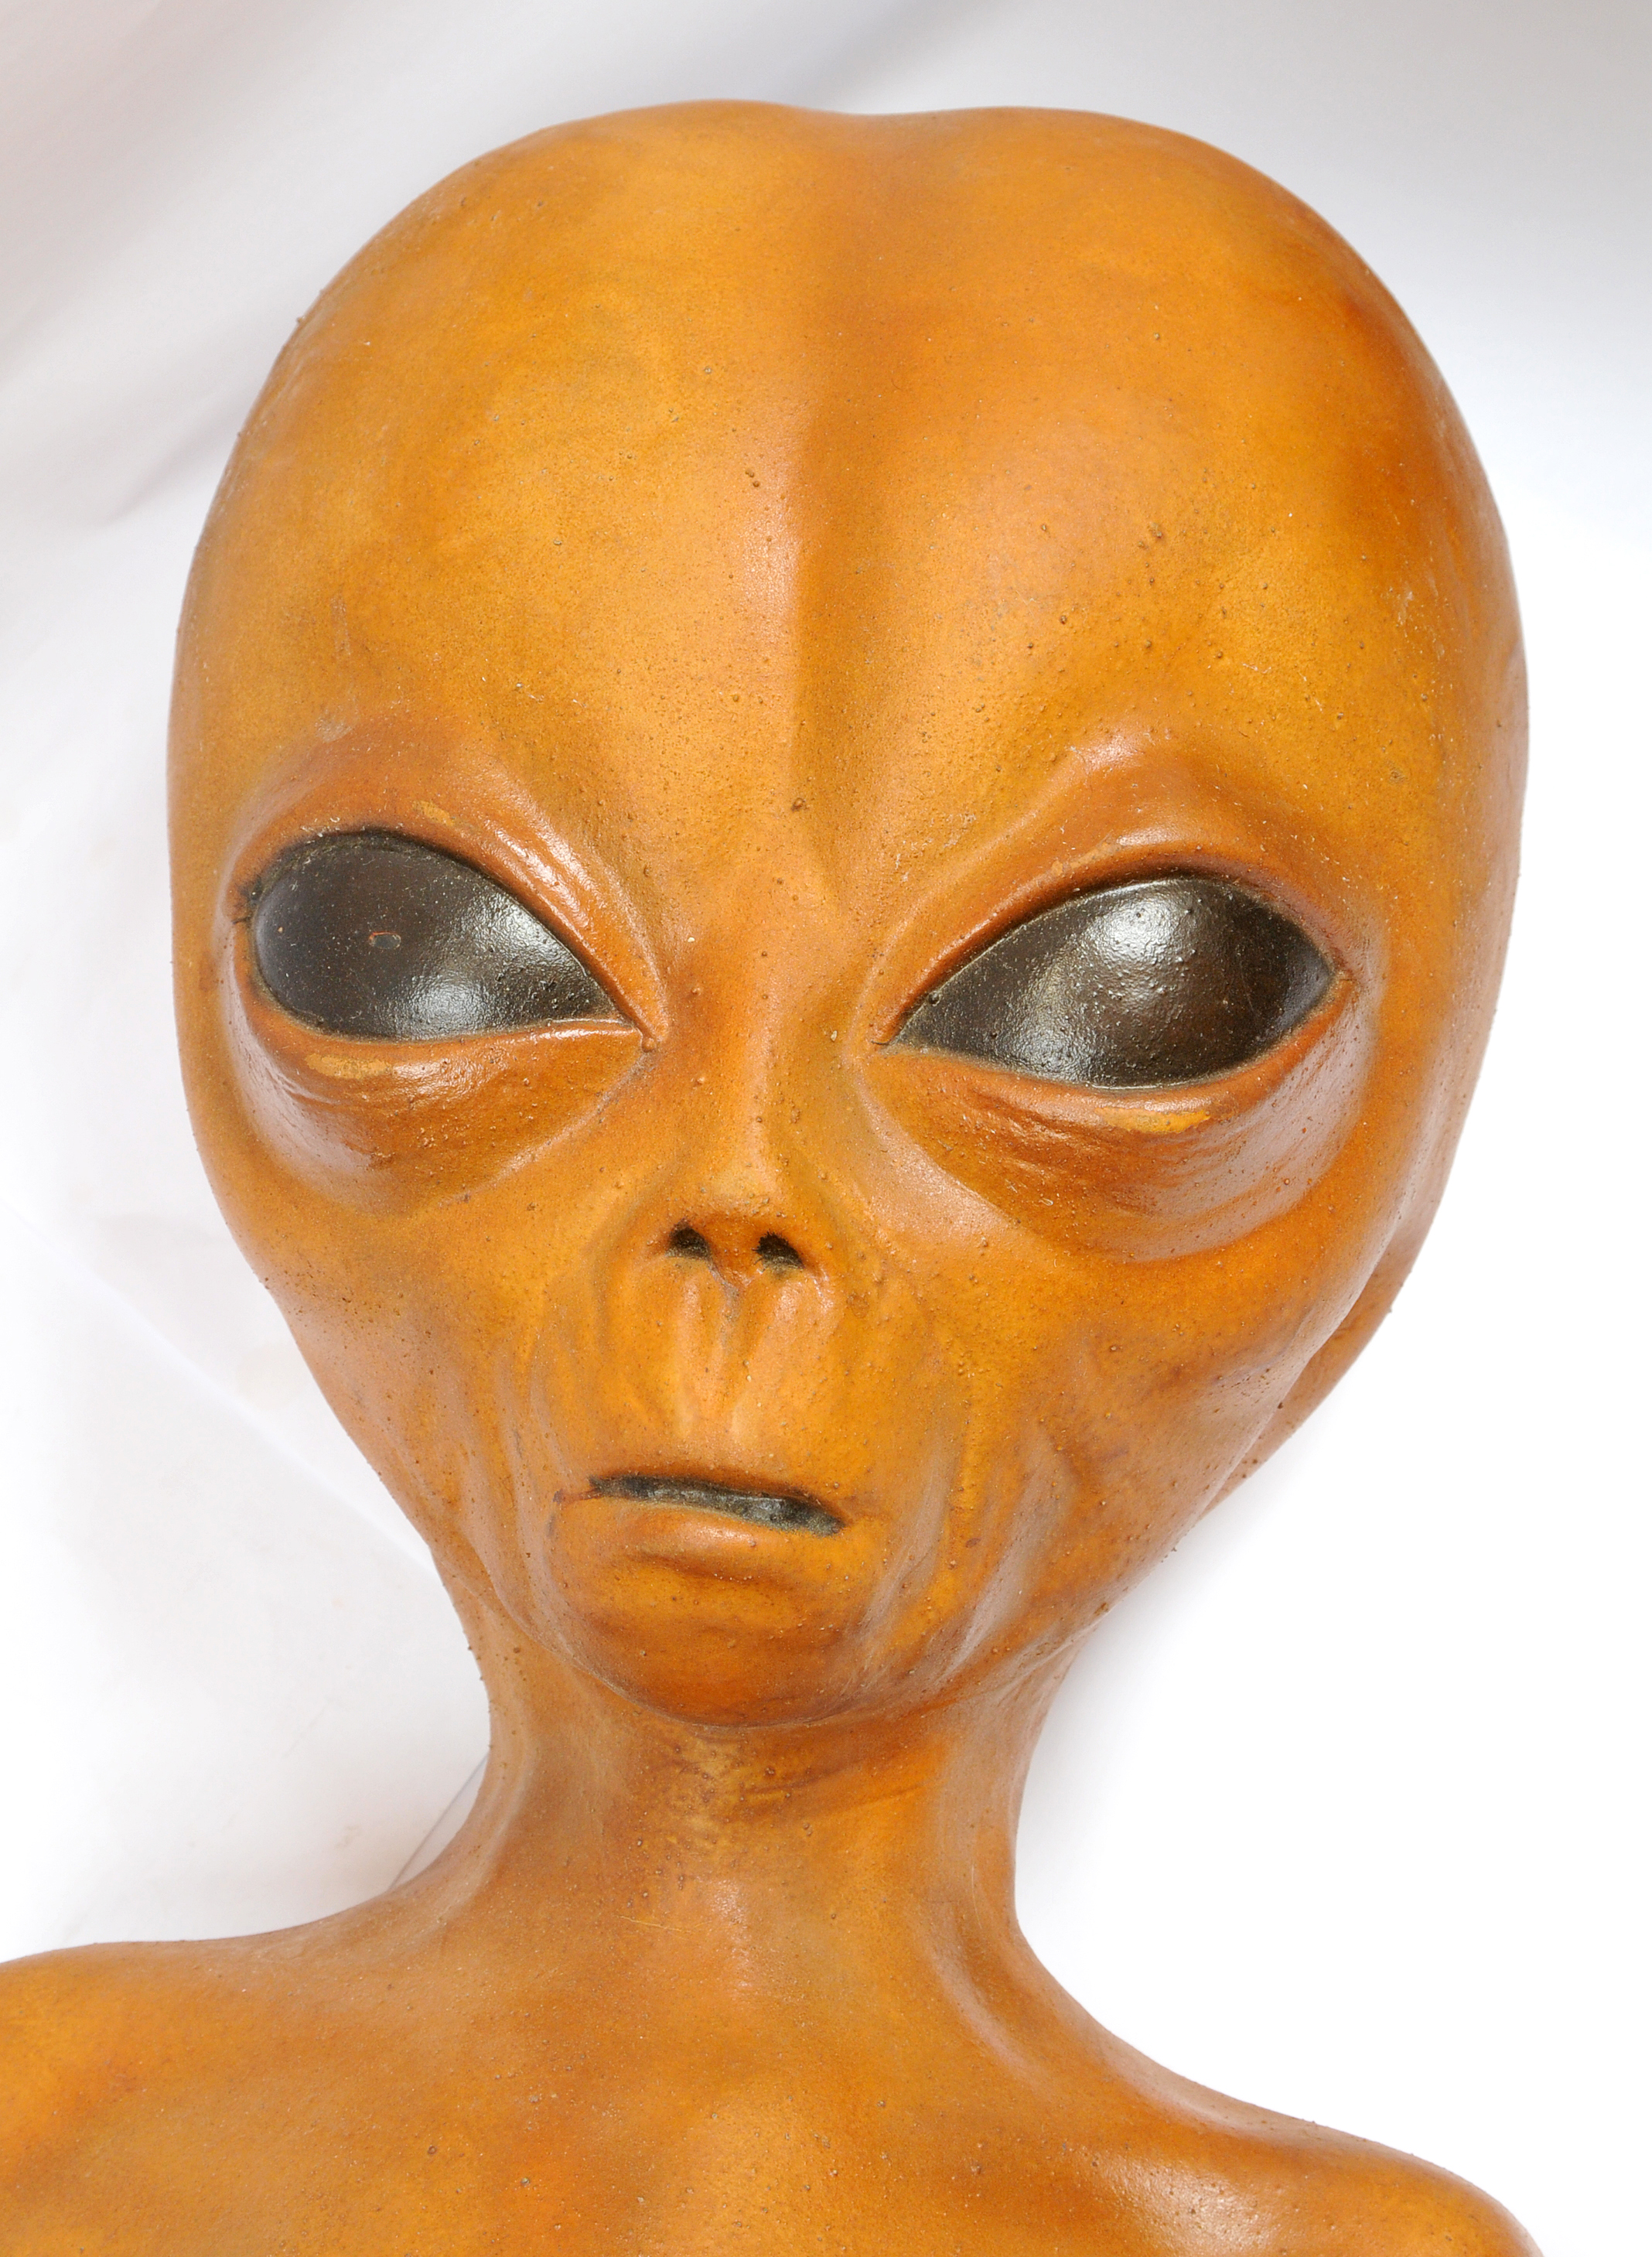 Life Size Alien Prop Used in The X-Files 1993 to 2016 - Image 2 of 8